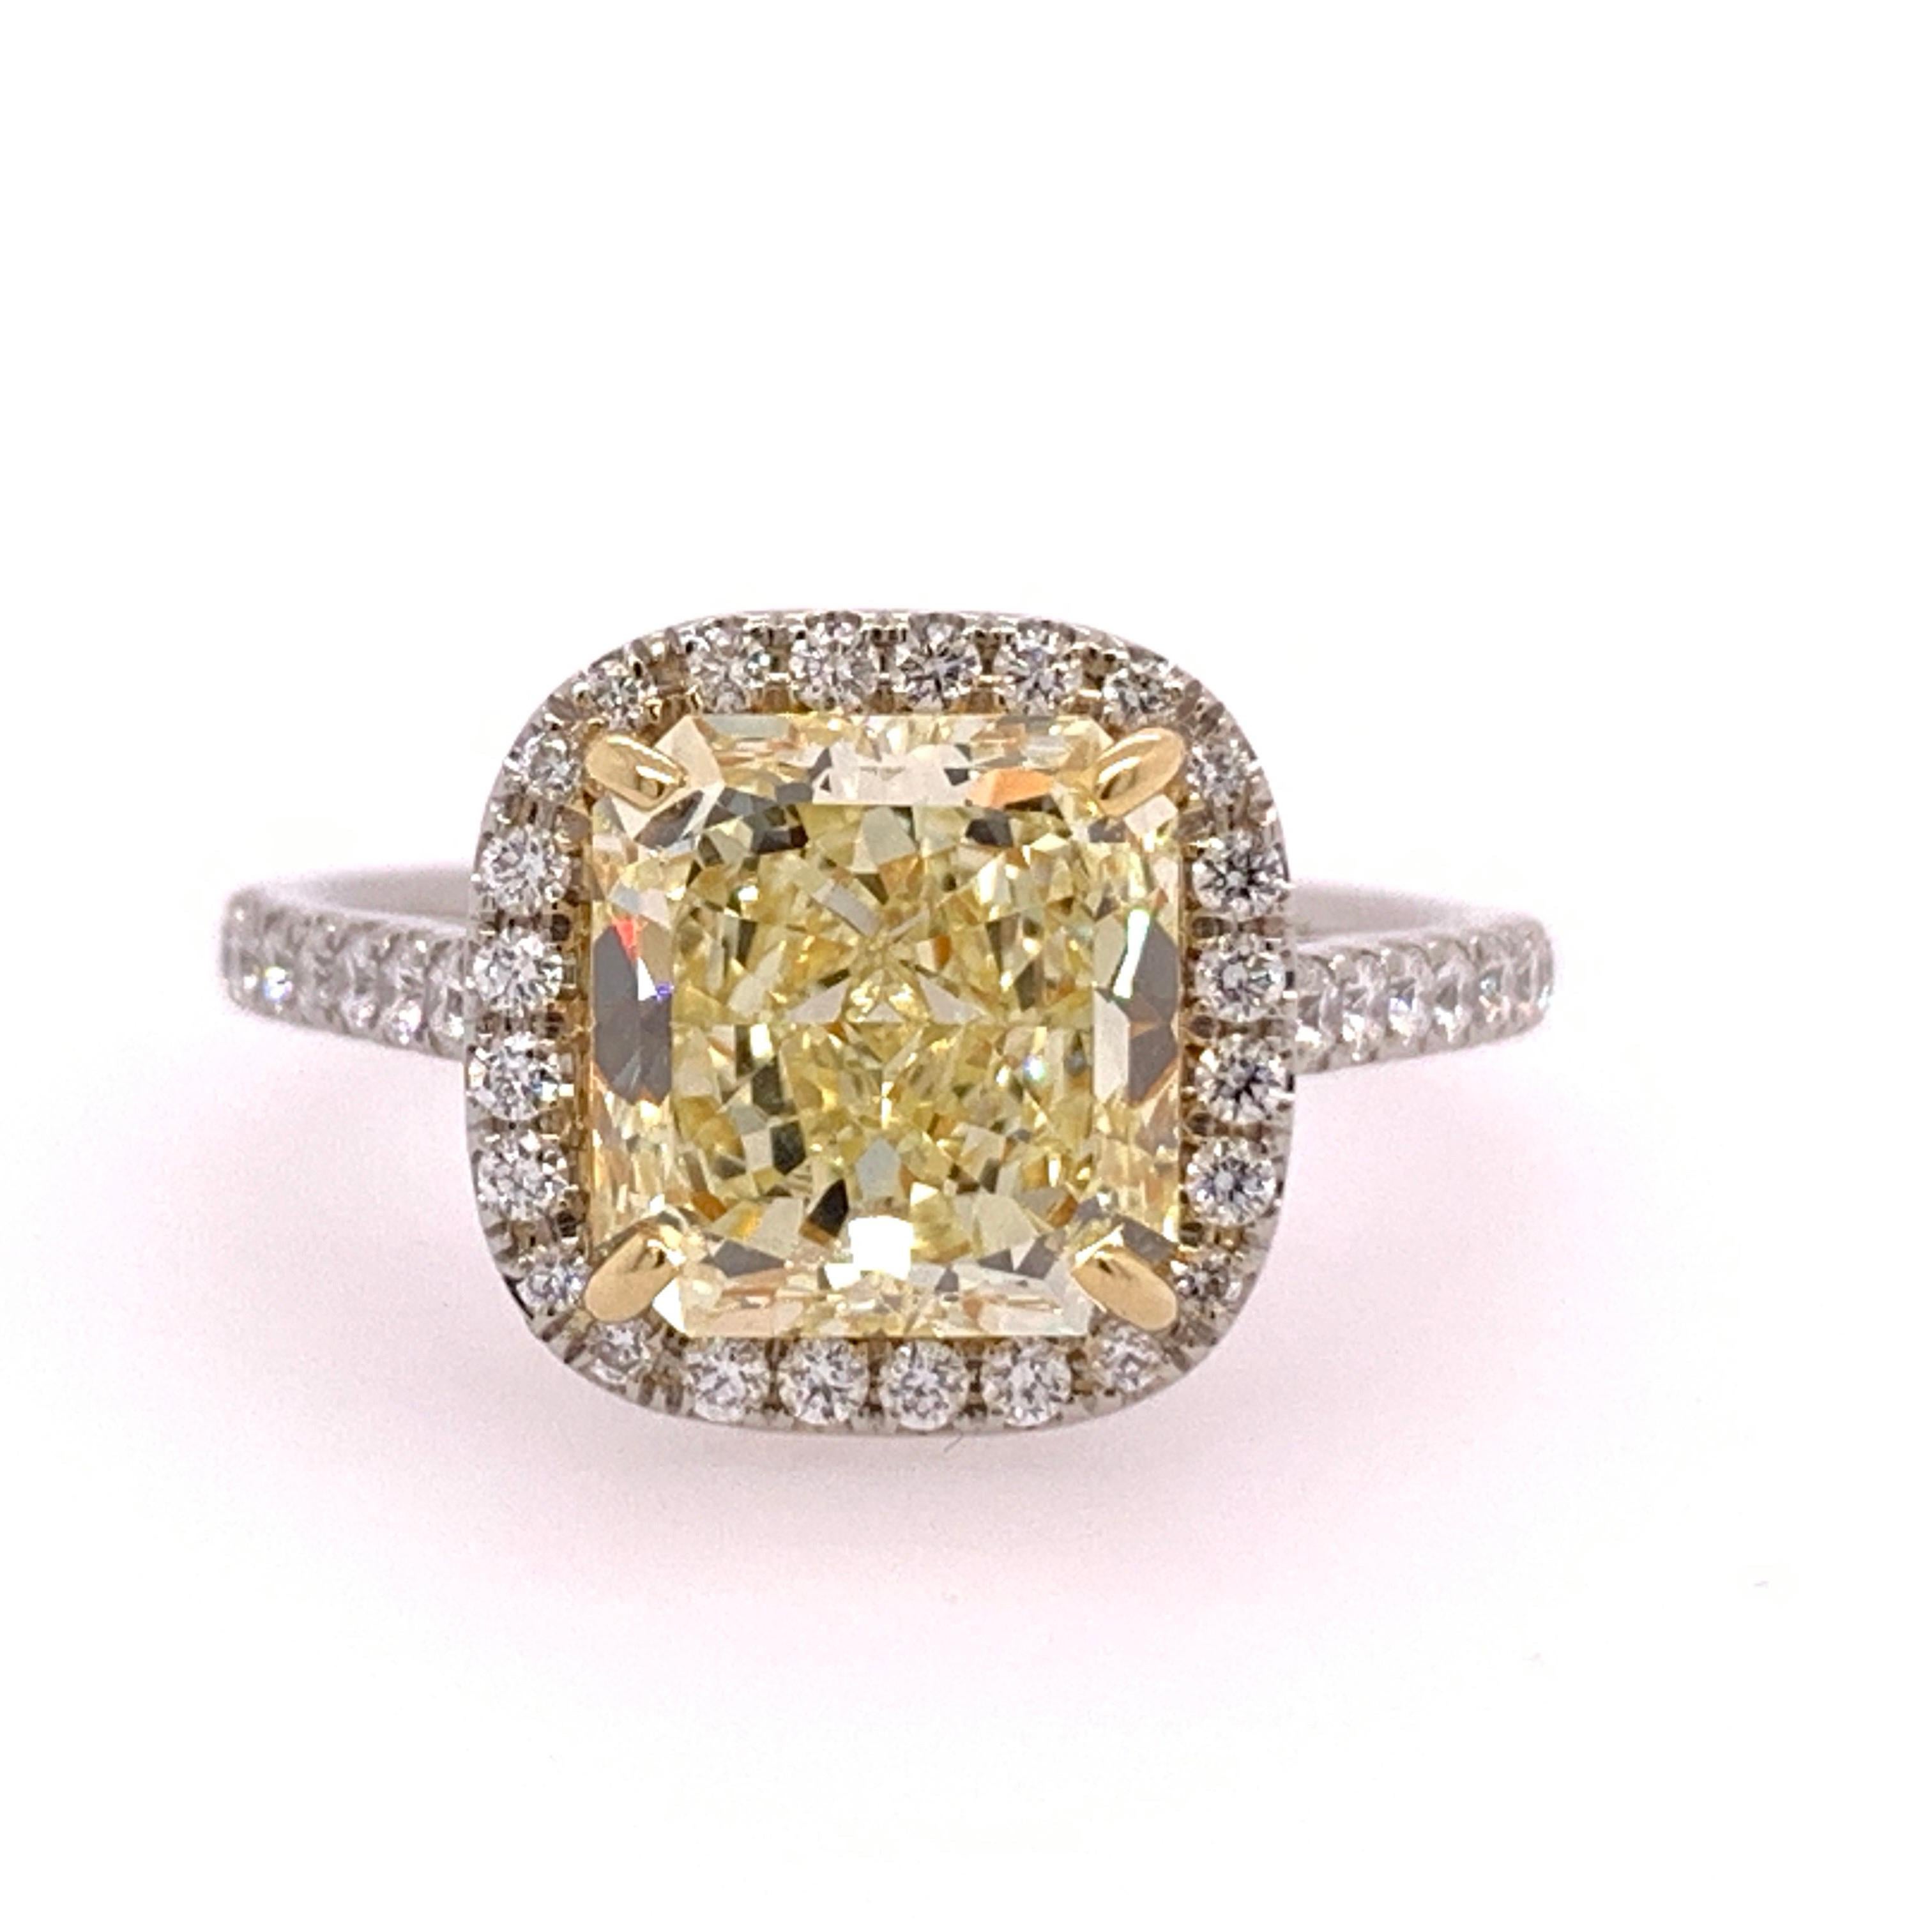 Platinum ring set with 46 Natural colorless round brilliant diamonds weighing a total of 0.40 carats. The ring size is a 6.

The centerstone is an exquisite Radiant Cut Natural Fancy Yellow, VVS1 clarity and No Fluorescence.